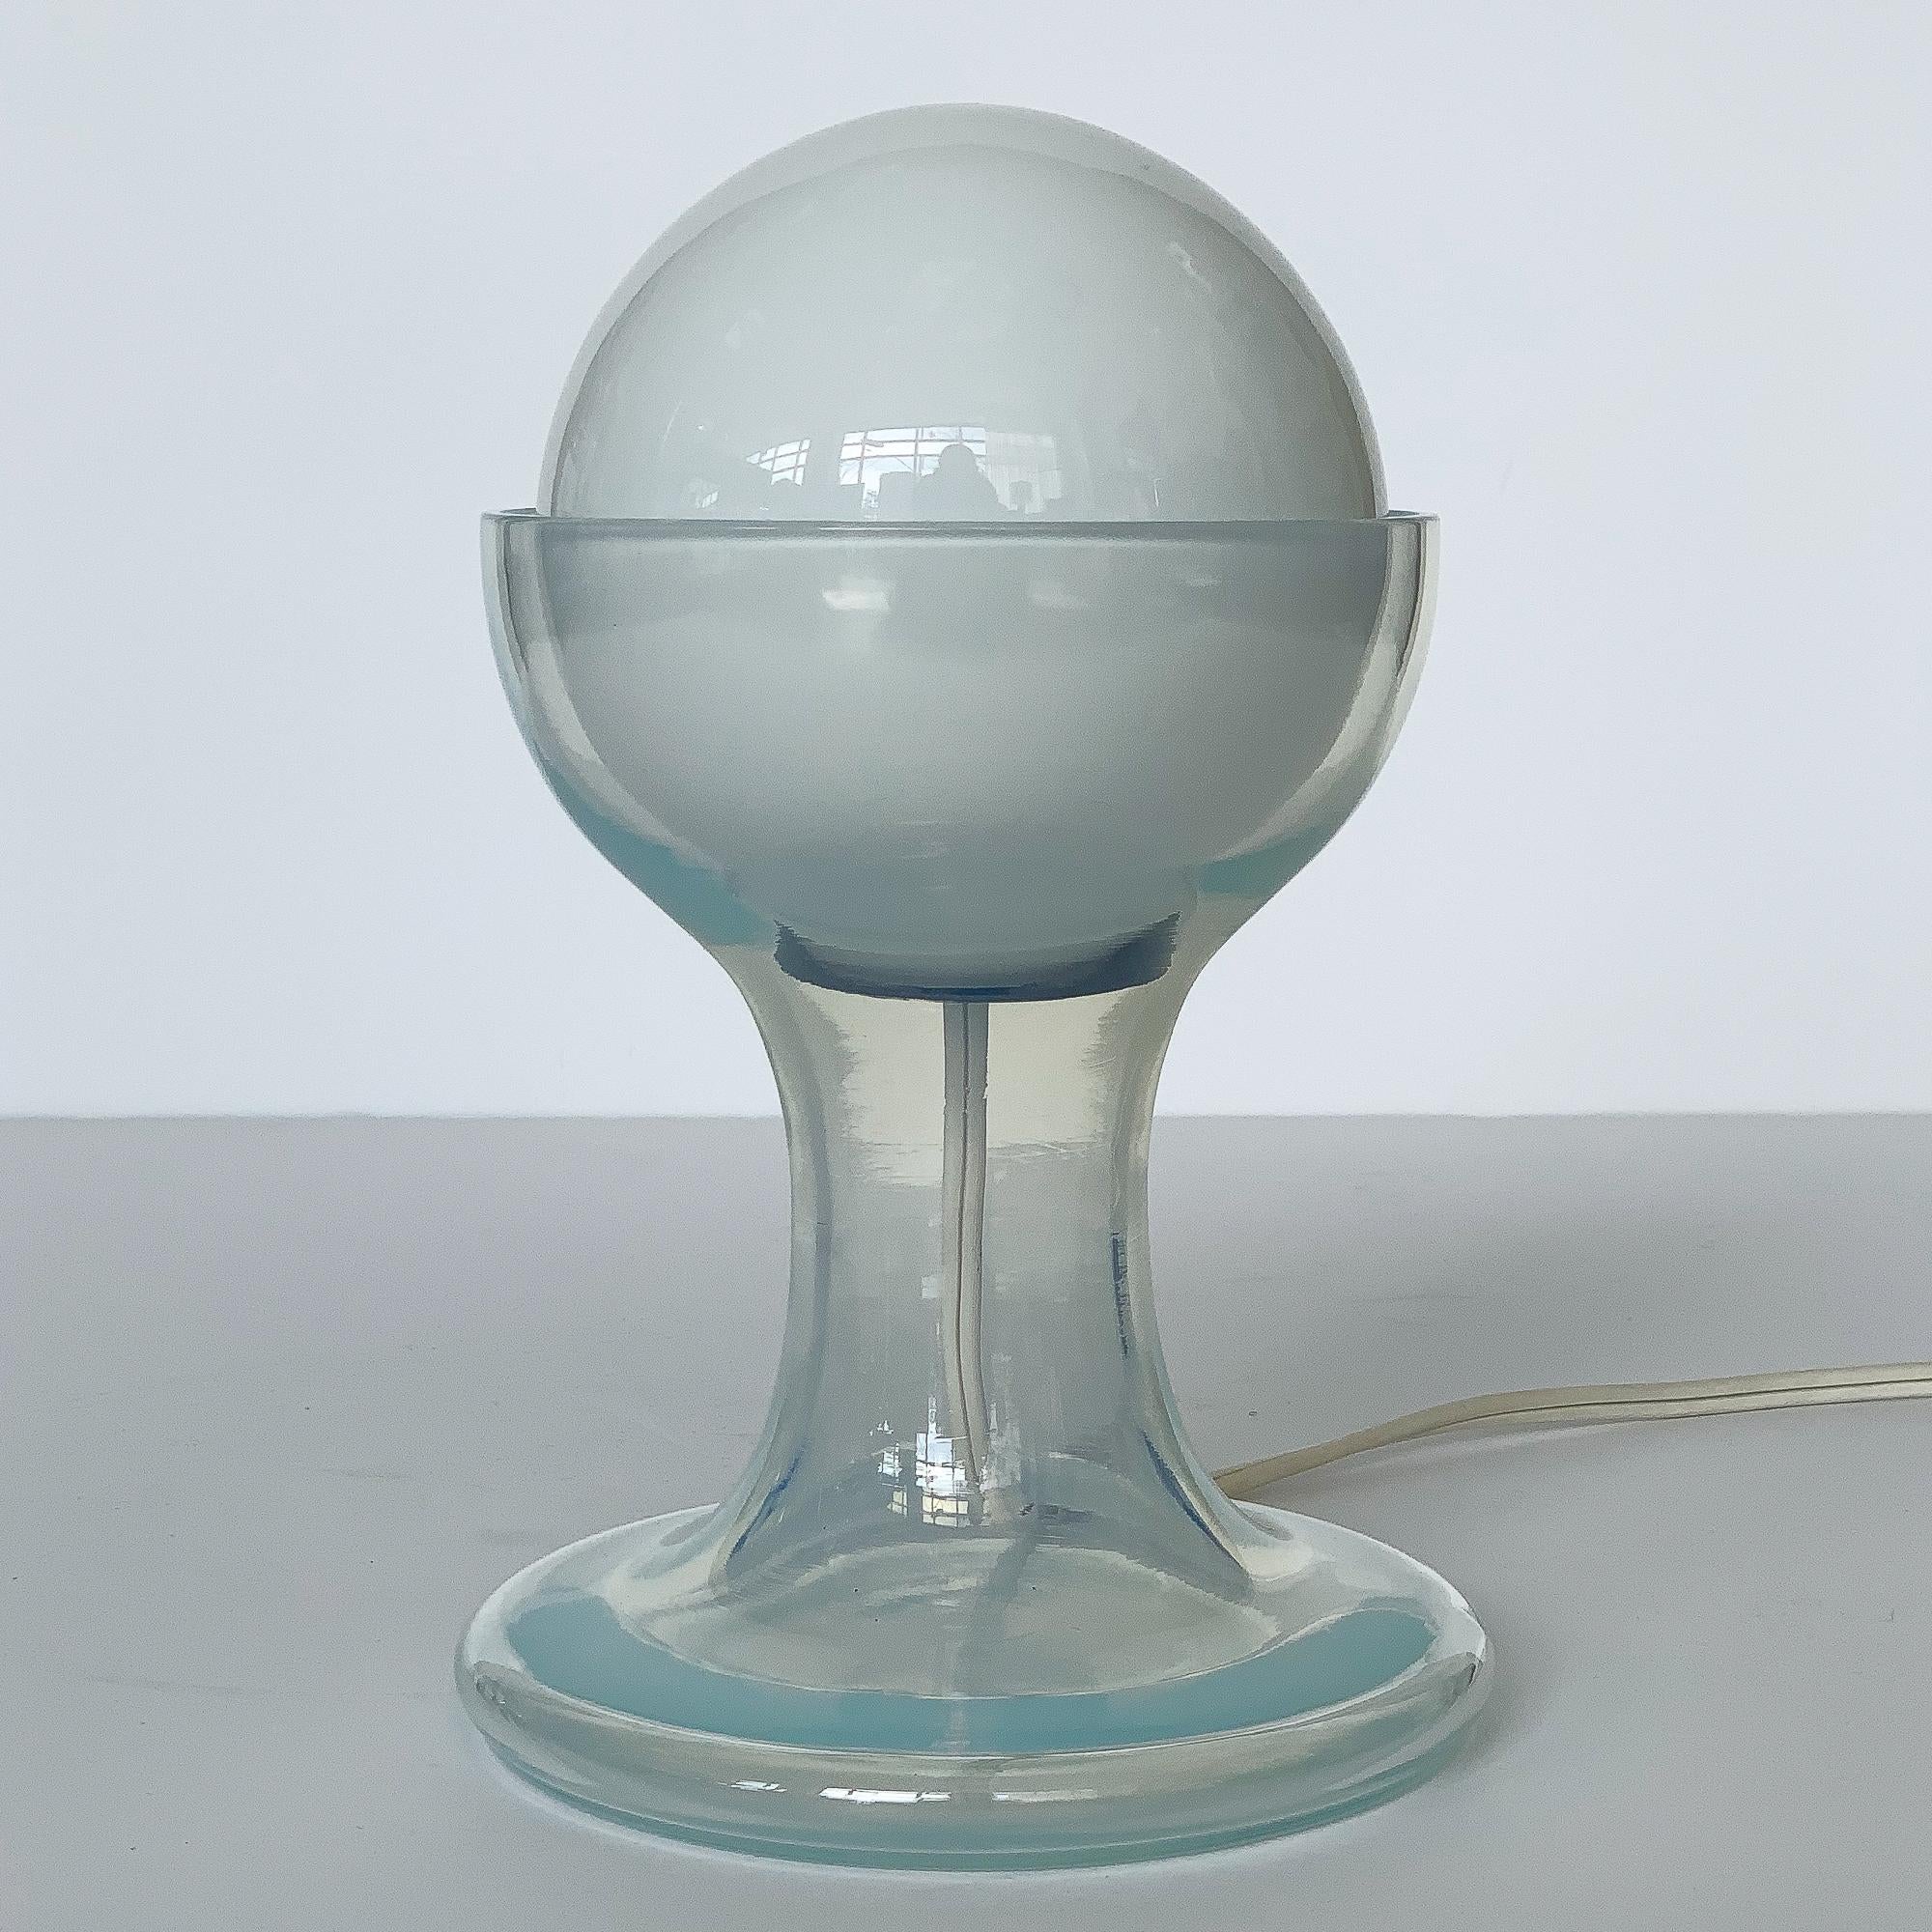 Italian opalescent Murano glass table lamp by Carlo Nason for Mazzega, circa 1960s. Model LT216. Opalescent / iridescent transparent glass base with a bluish cast. 5